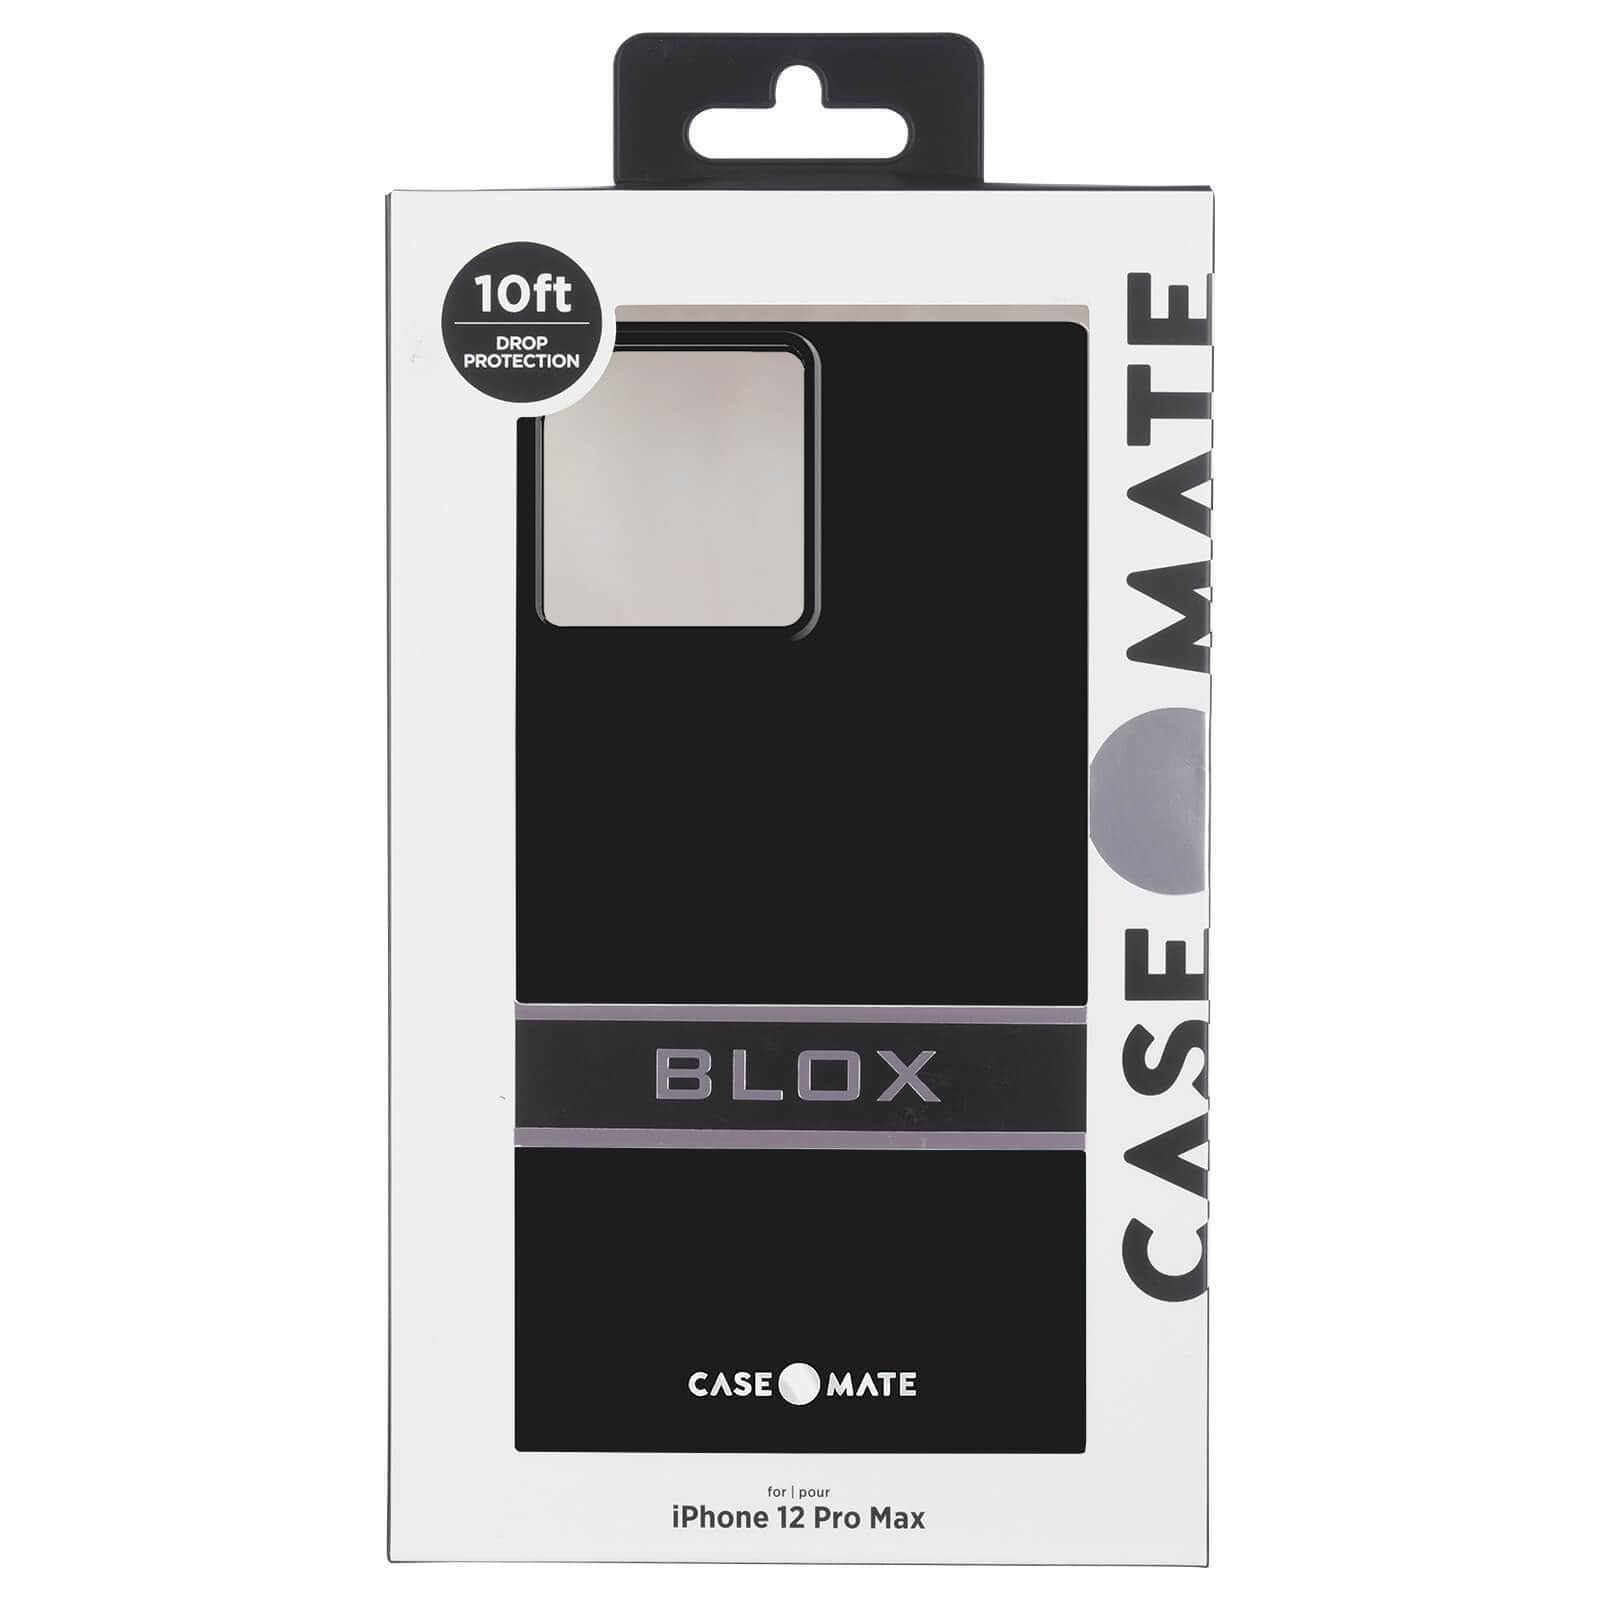 BLOX packaging. 10 ft Drop Protection. Case-Mate BLOX for iPhone 12 Pro Max. color::Black